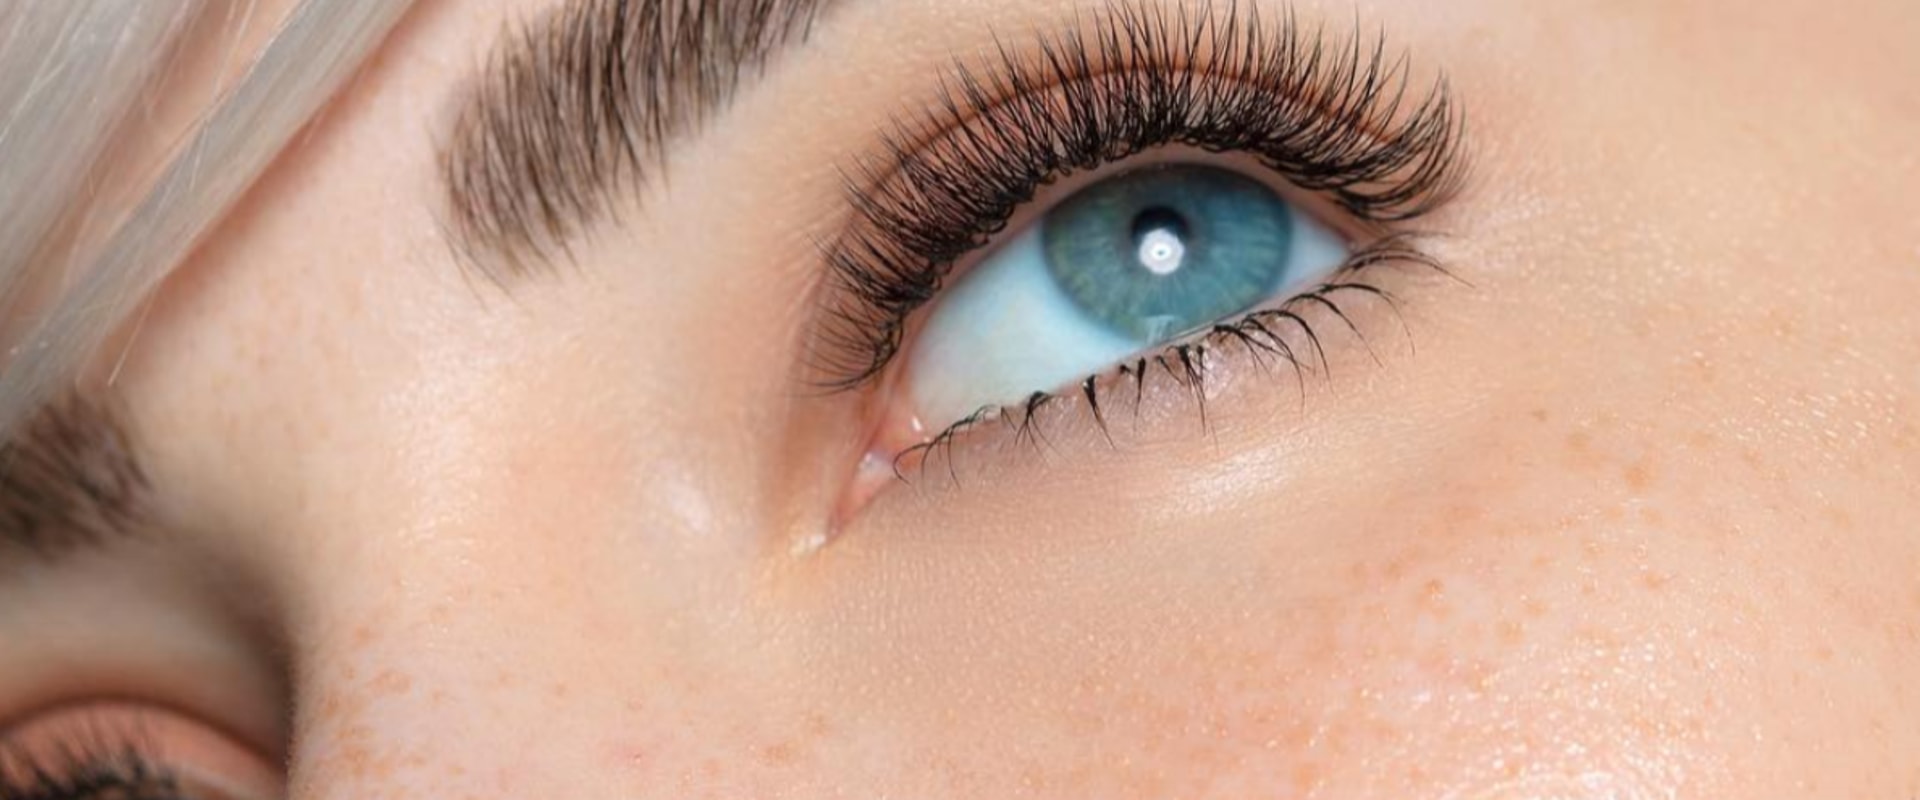 At what age can you get lash extensions?